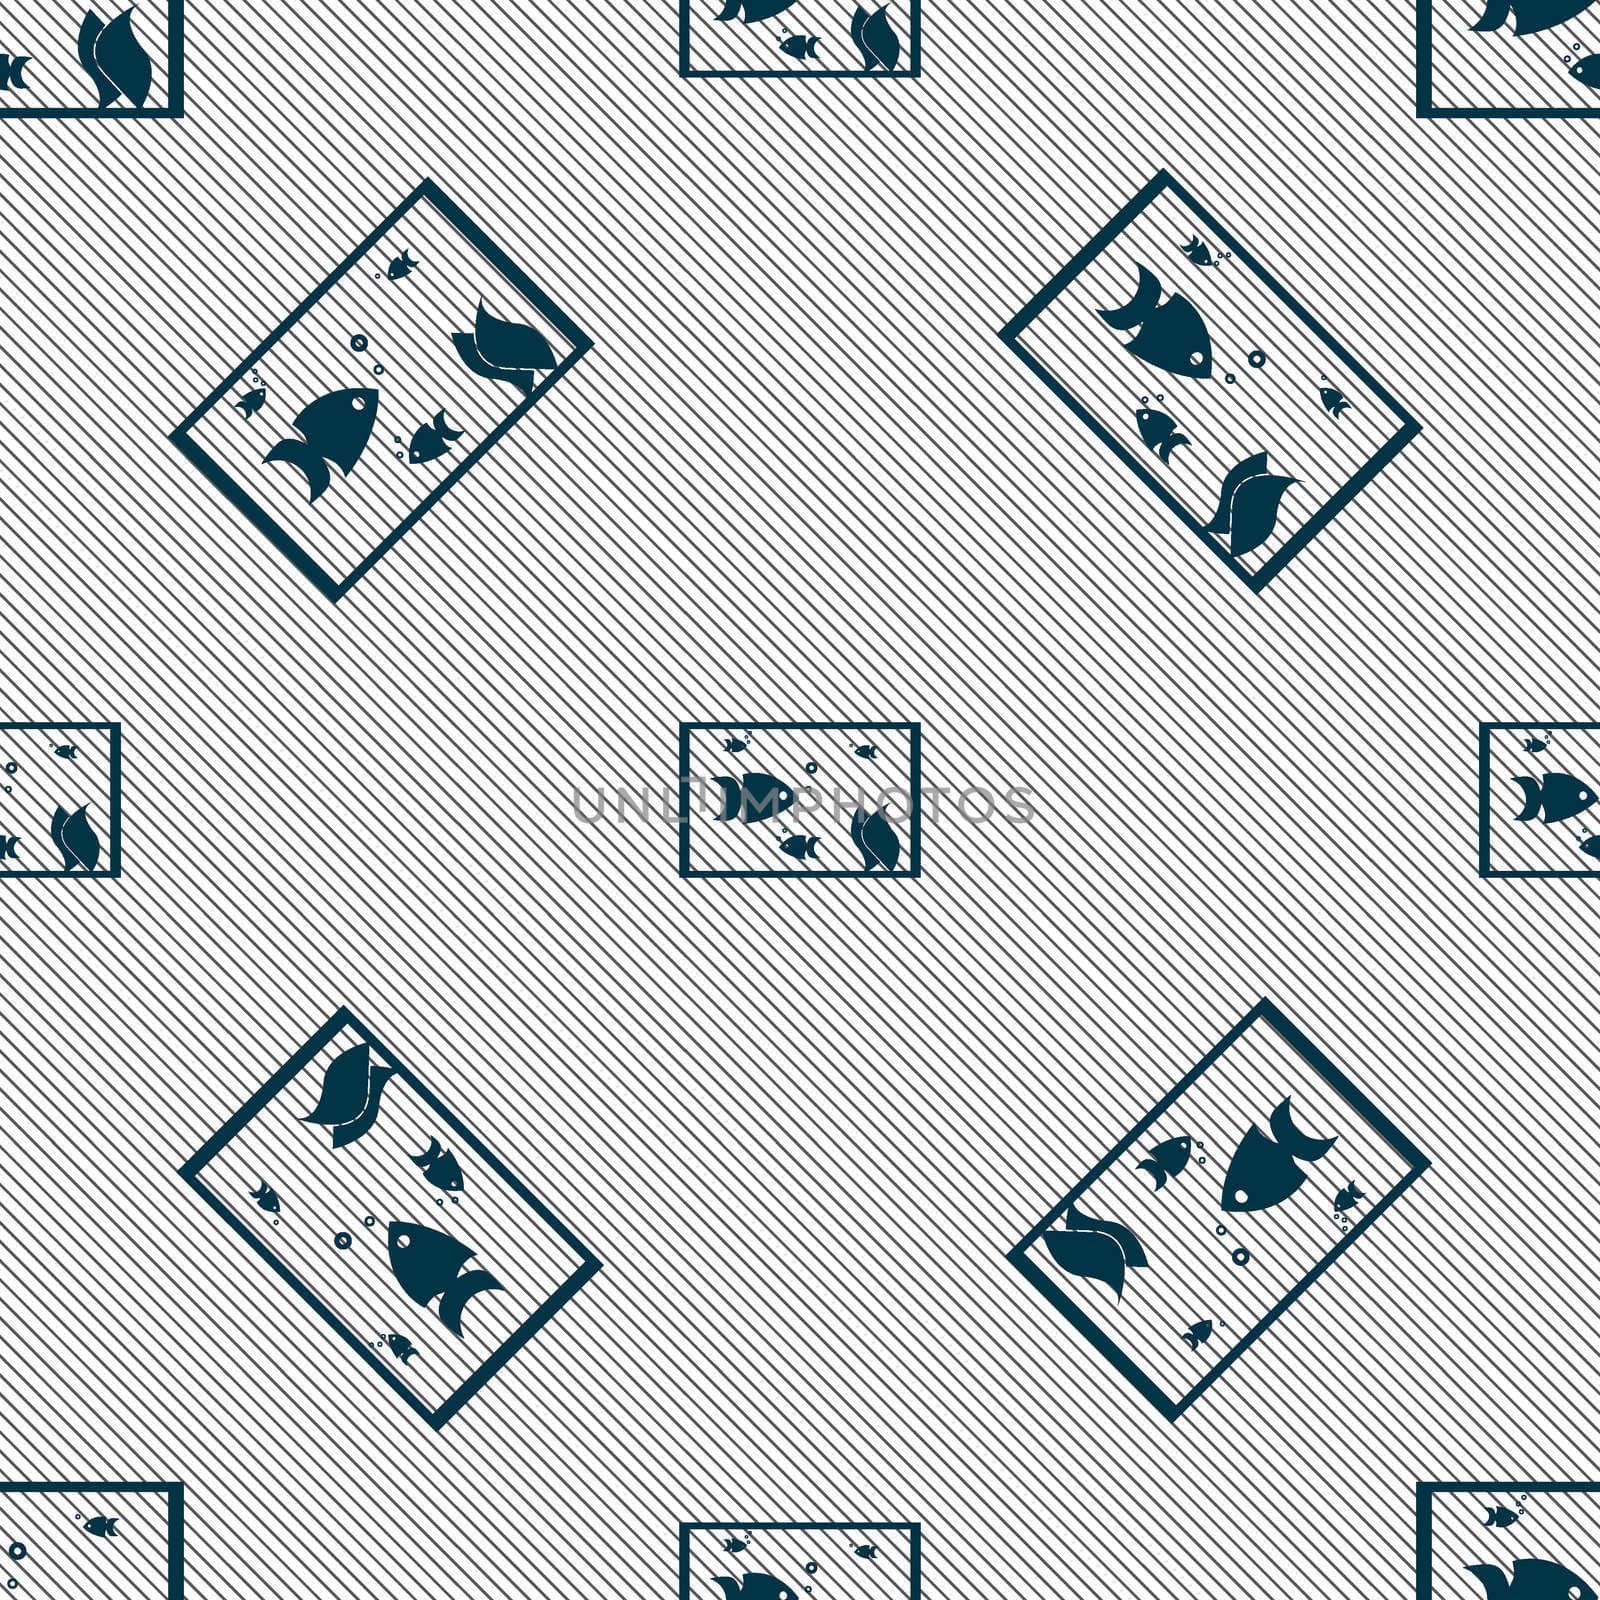 Aquarium, Fish in water icon sign. Seamless pattern with geometric texture. illustration